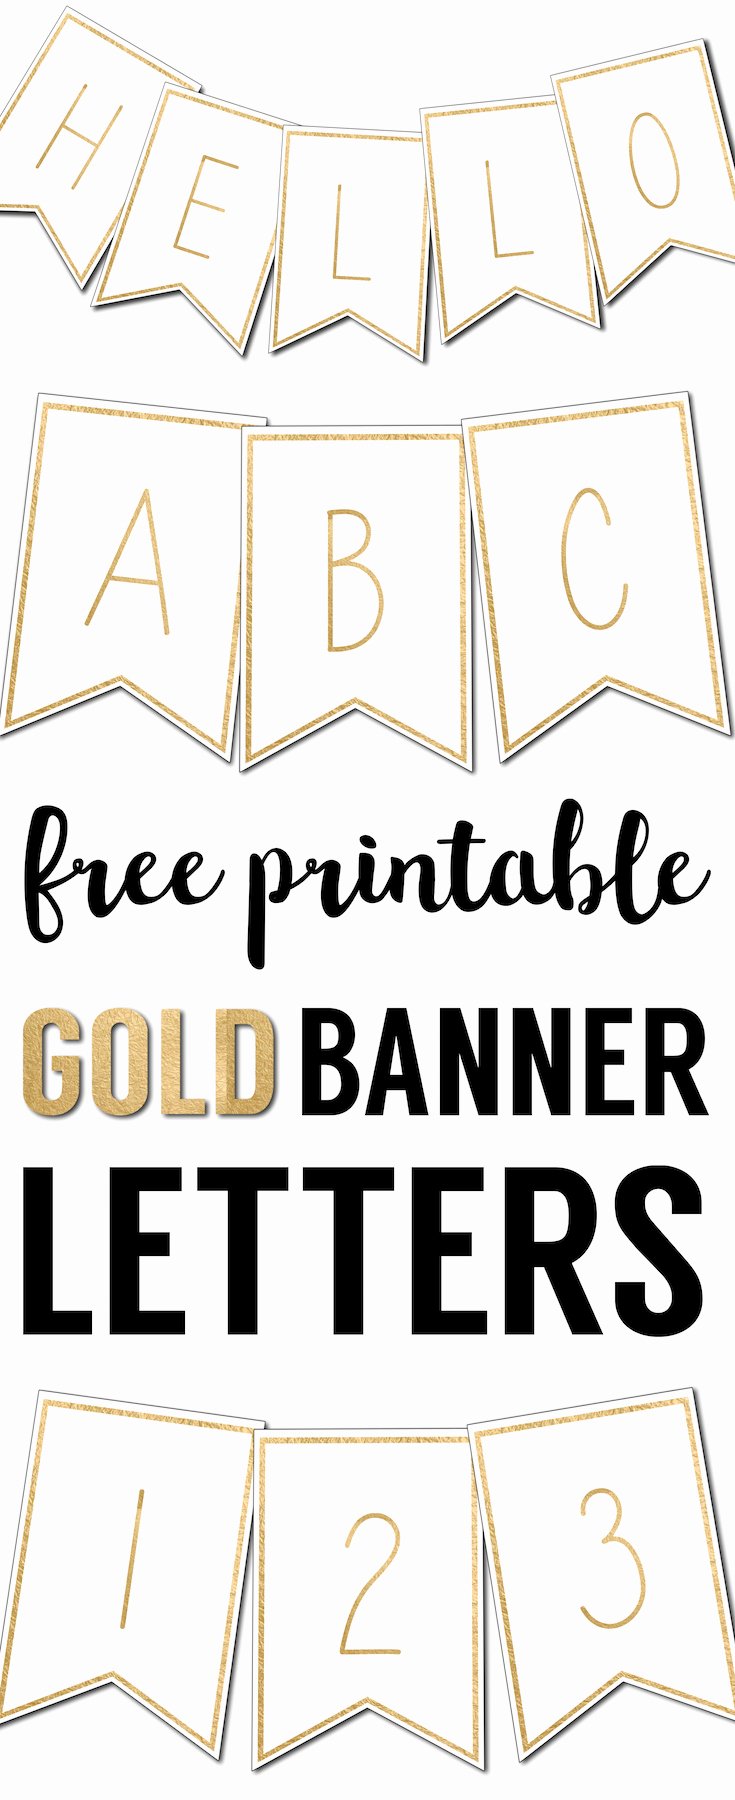 Free Printable Banner Template New Free Printable Banner Letters Templates Paper Trail Design